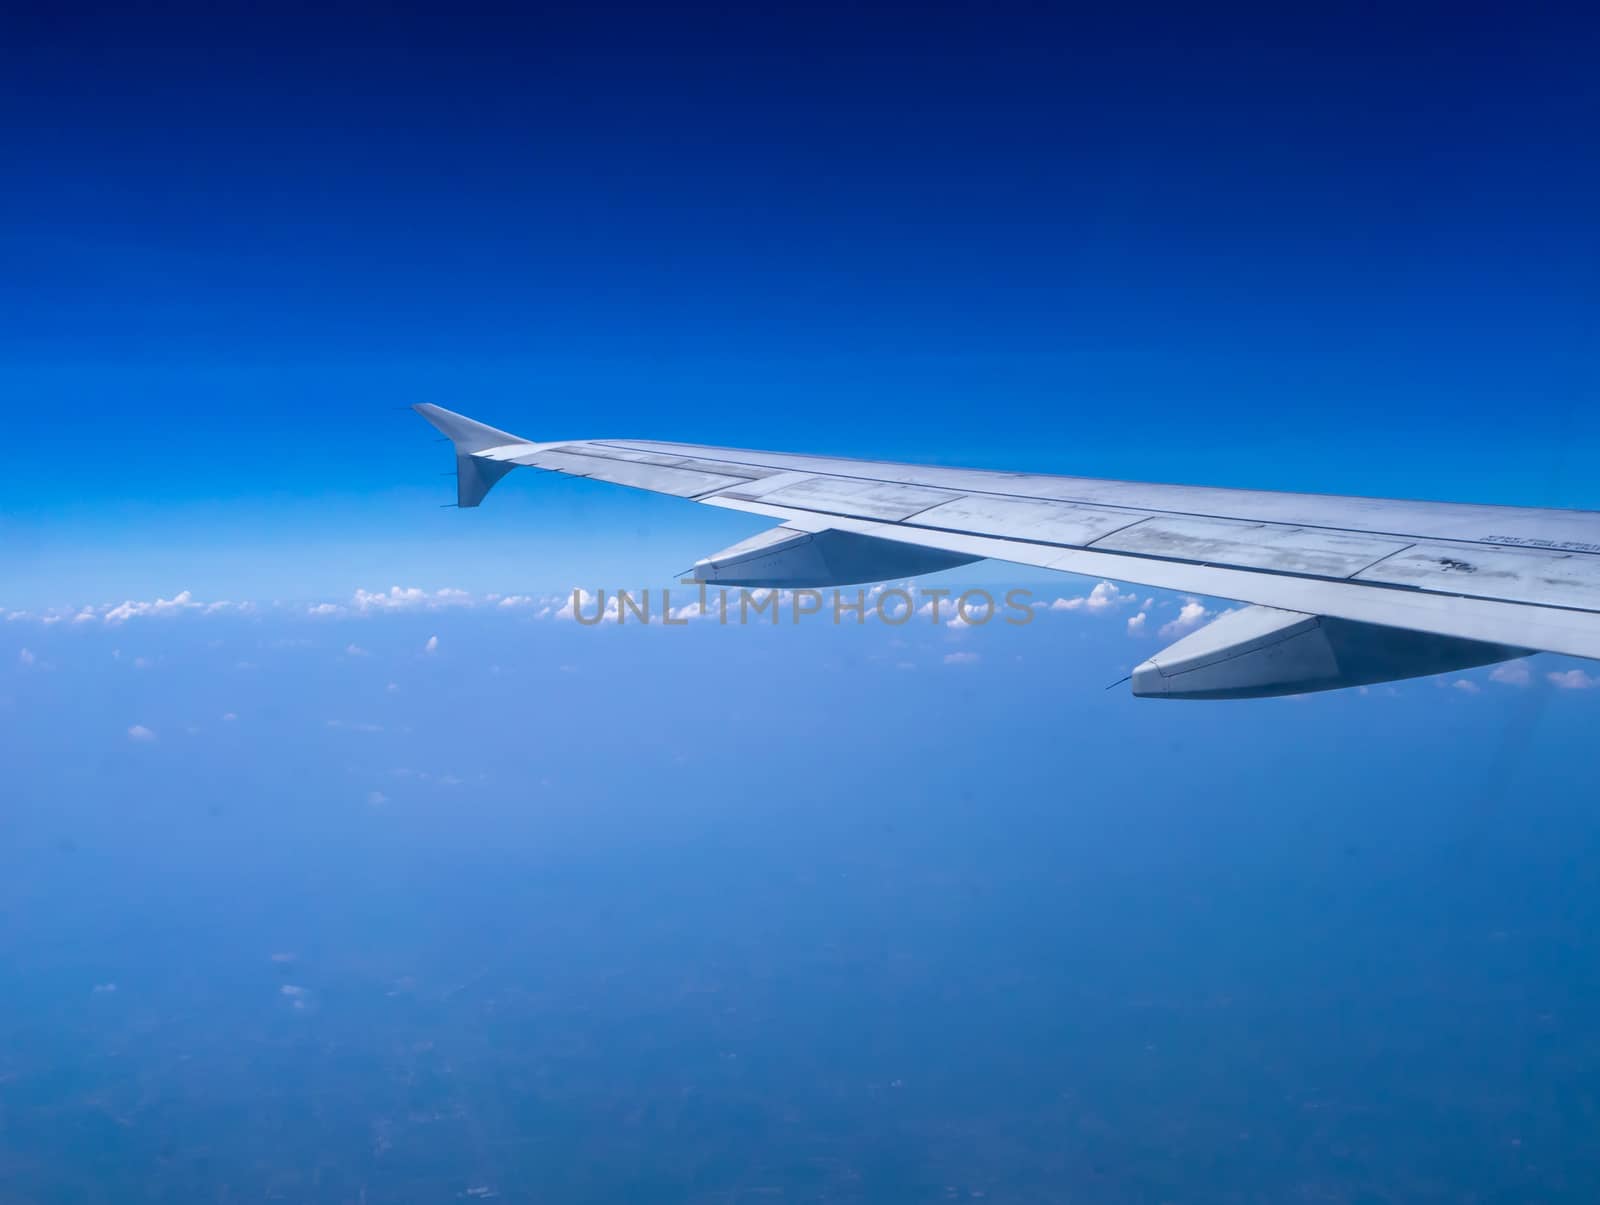 The looking at aircraft wing view from windows by shutterbird